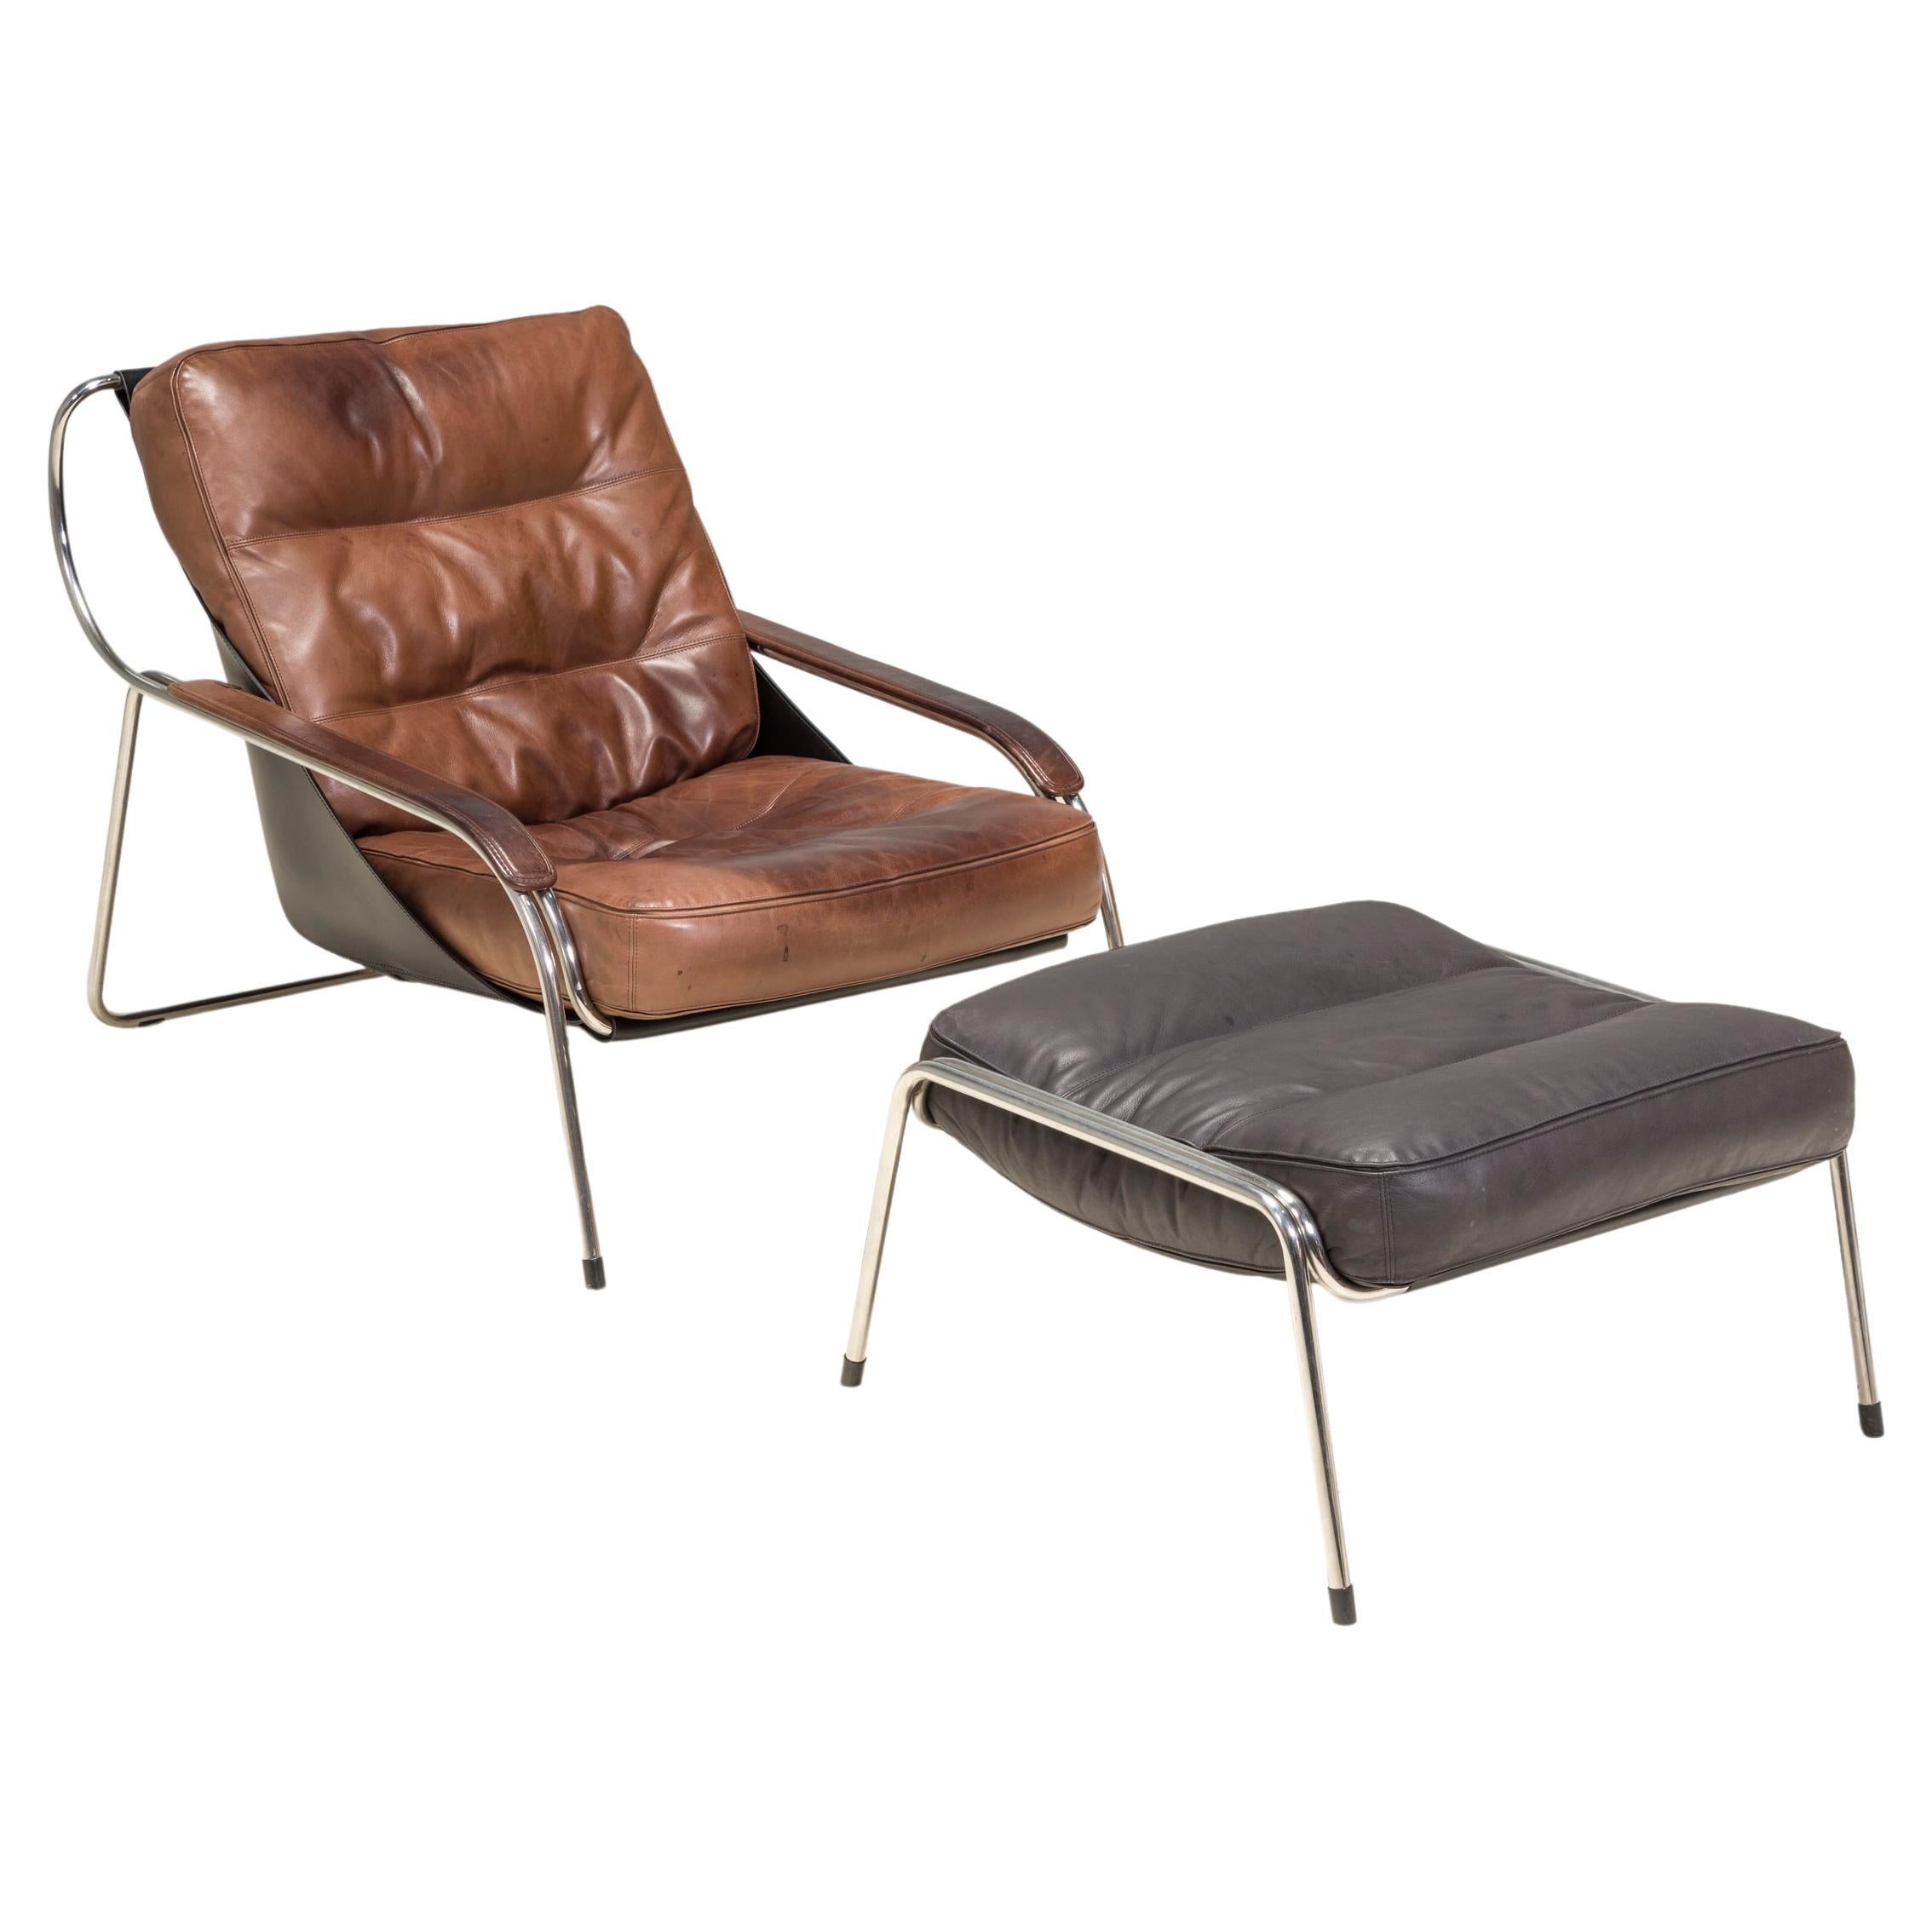 Marco Zanuso for Zanotta Brown Leather Maggiolina Lounge Chair & Footstool For Sale